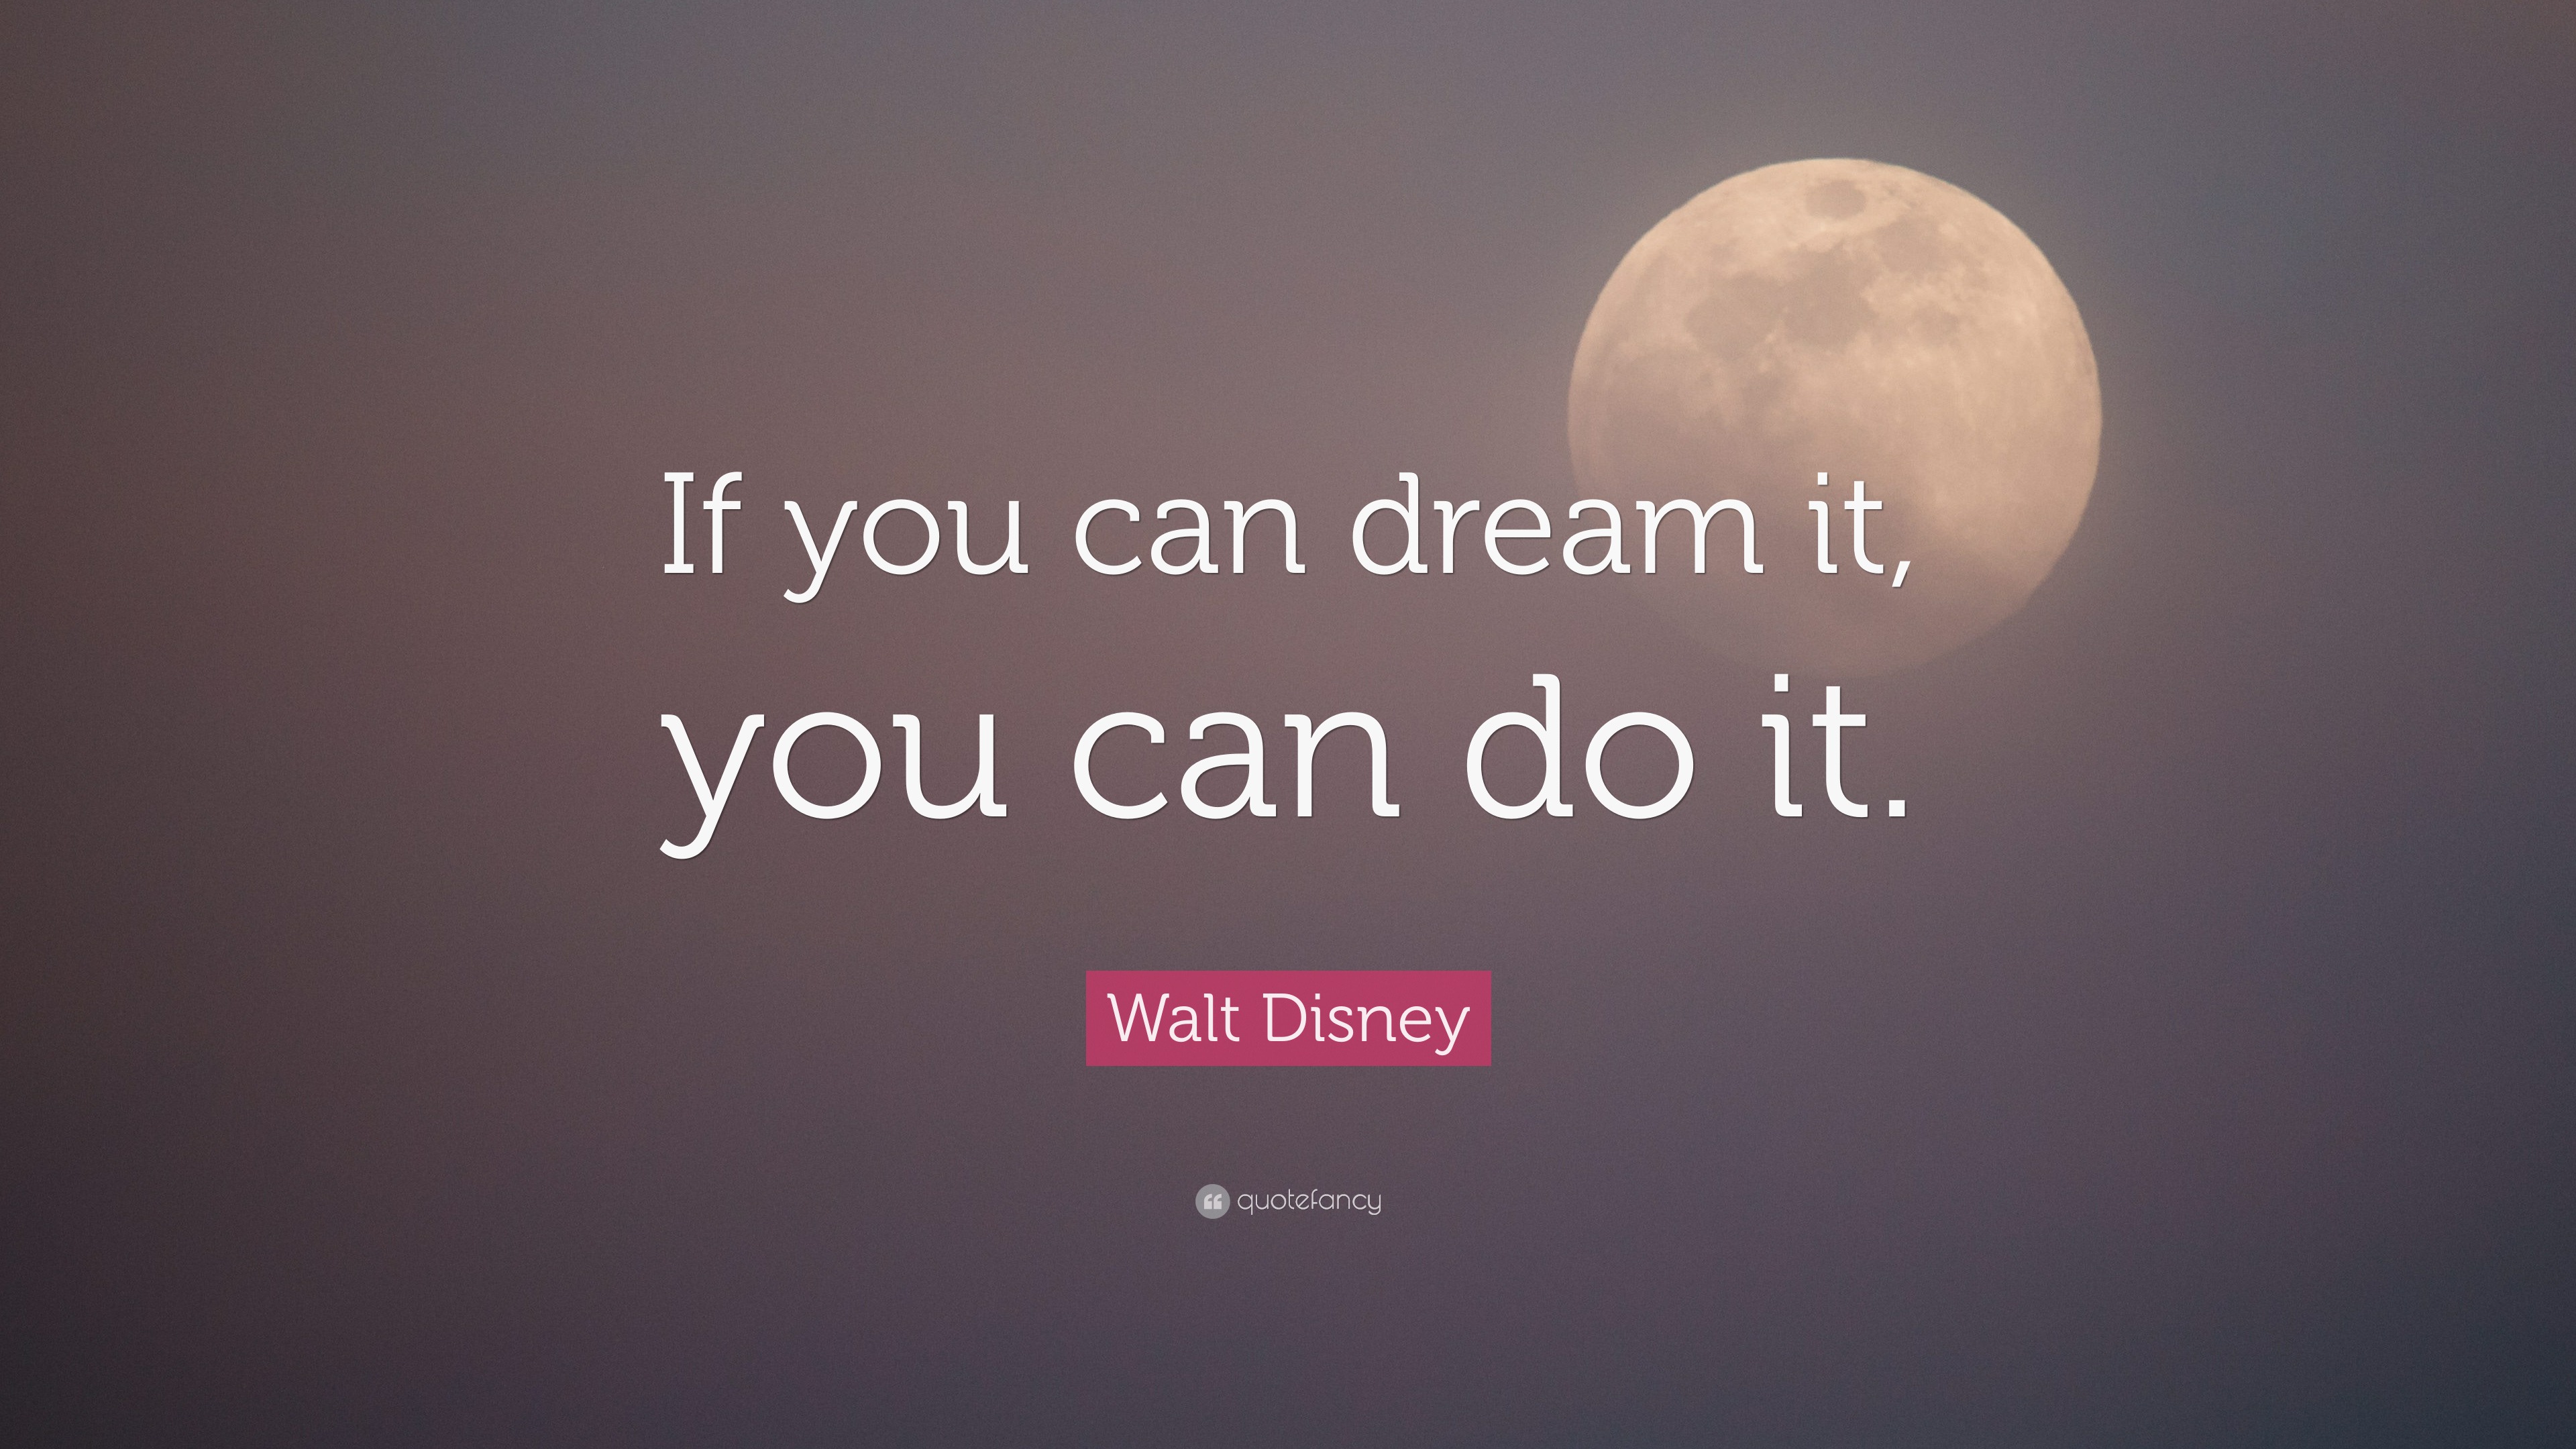 Walt Disney Quote: “If you can dream it, you can do it.” (28 wallpapers